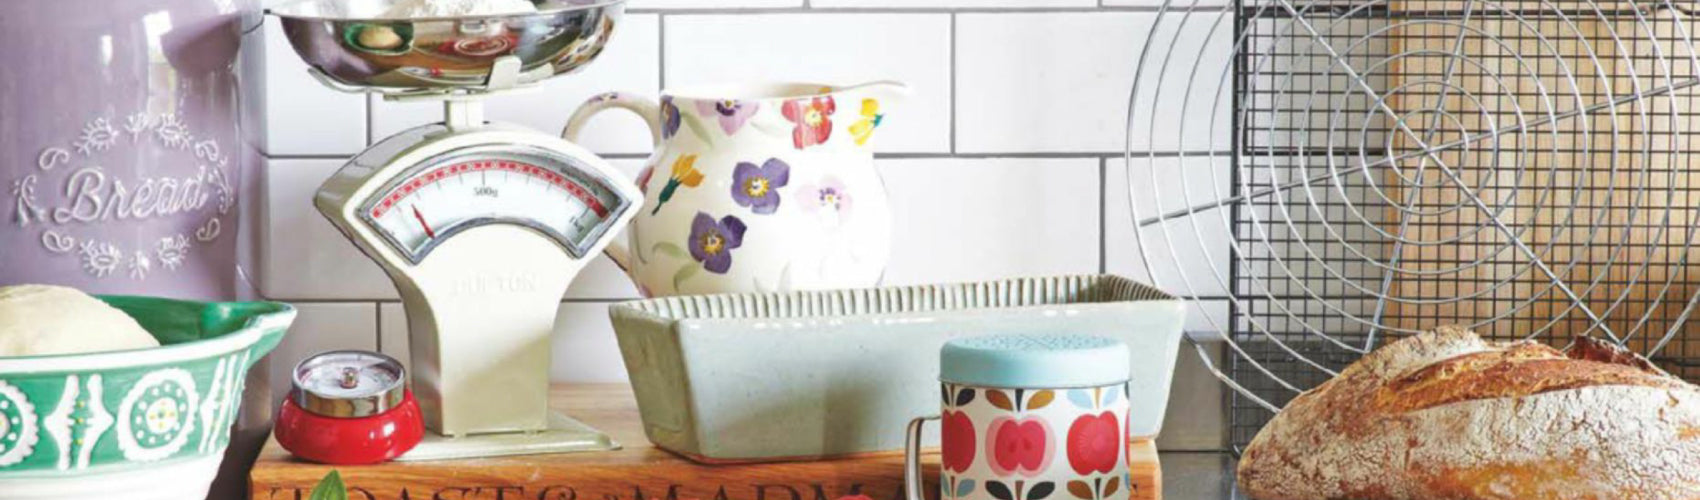 Country Homes & Interiors October 2016 Post Header